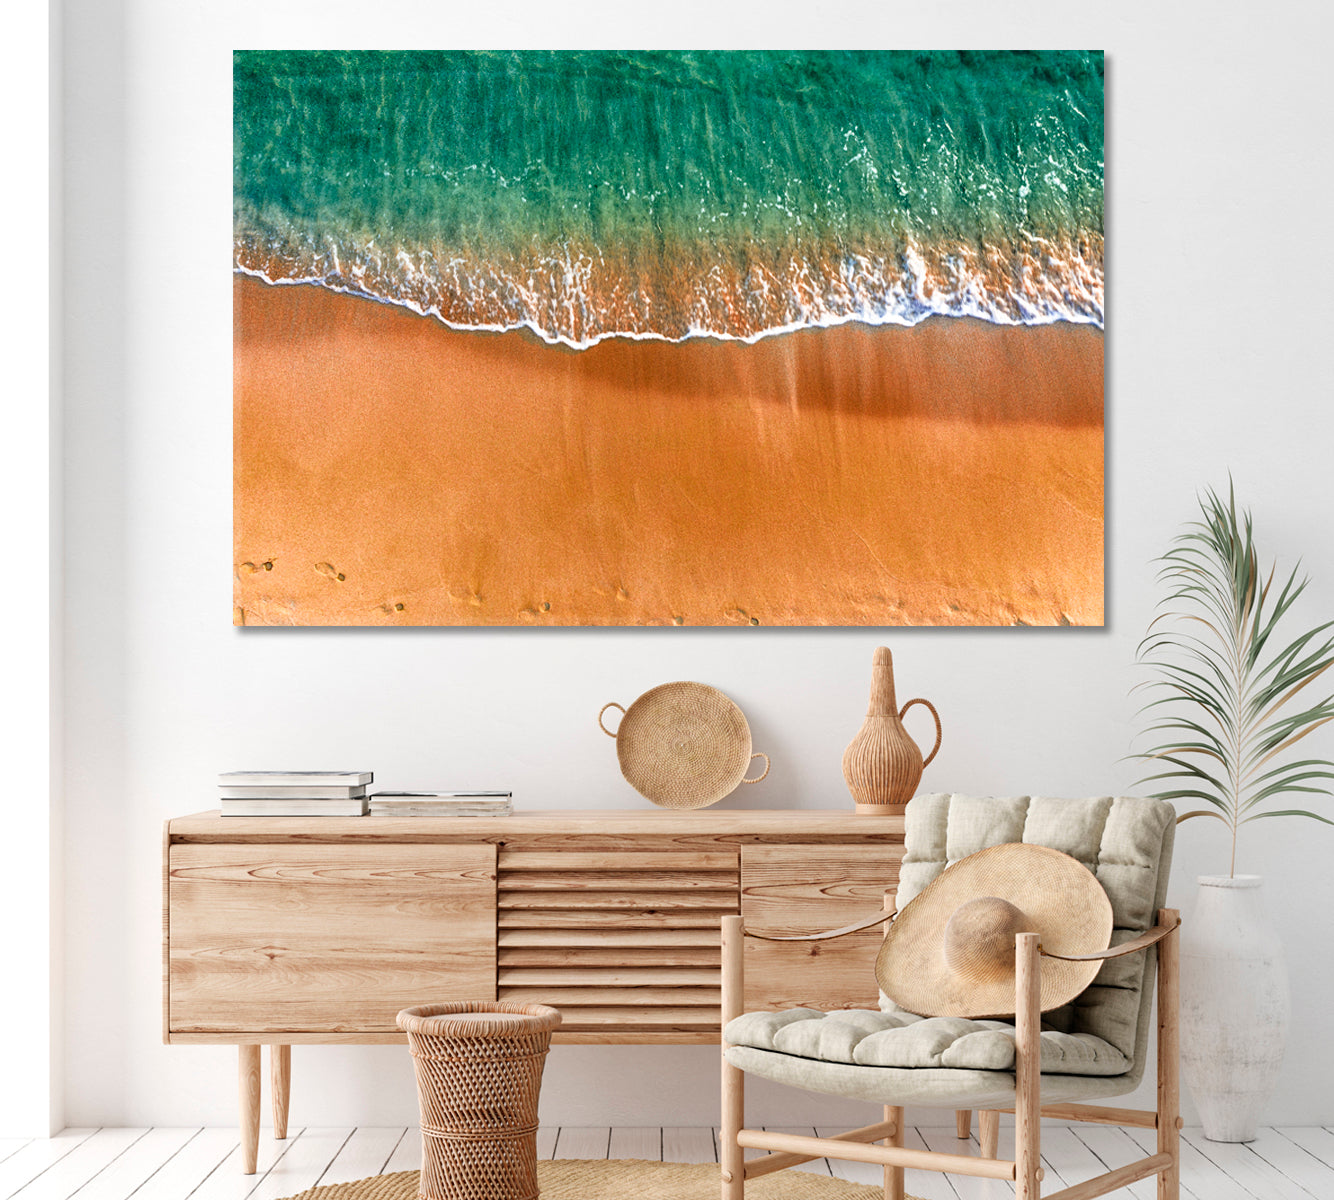 Sandy Seashore and Turquoise Sea Canvas Print ArtLexy 1 Panel 24"x16" inches 